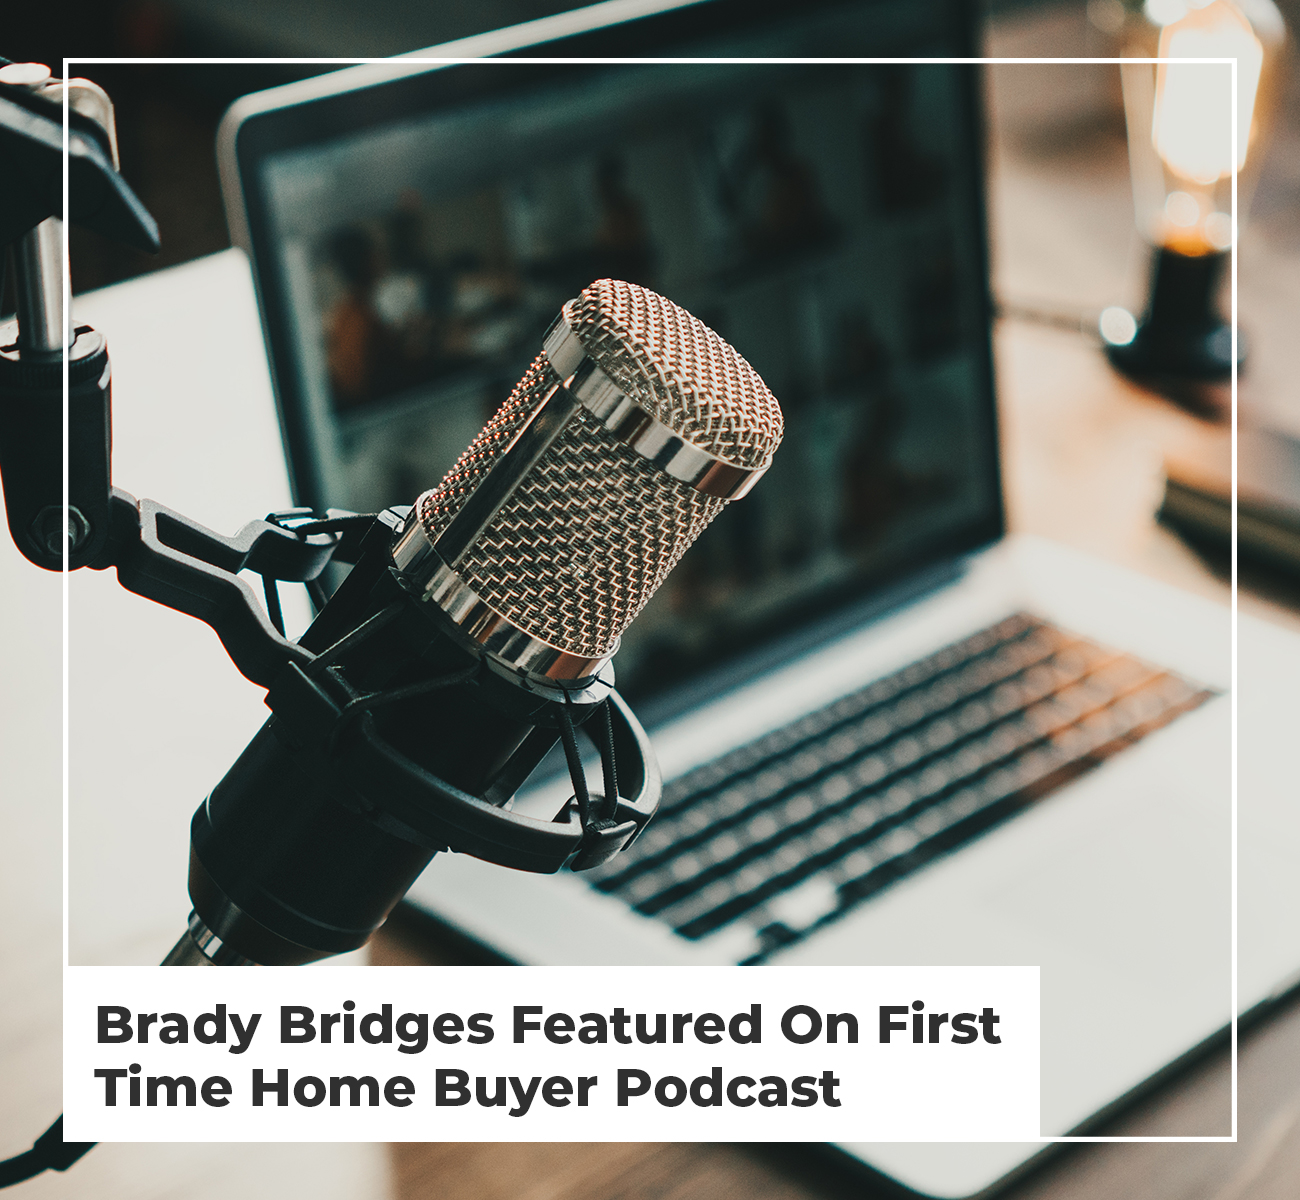 Brady Bridges Featured On First Time Home Buyer Podcast - Main Image